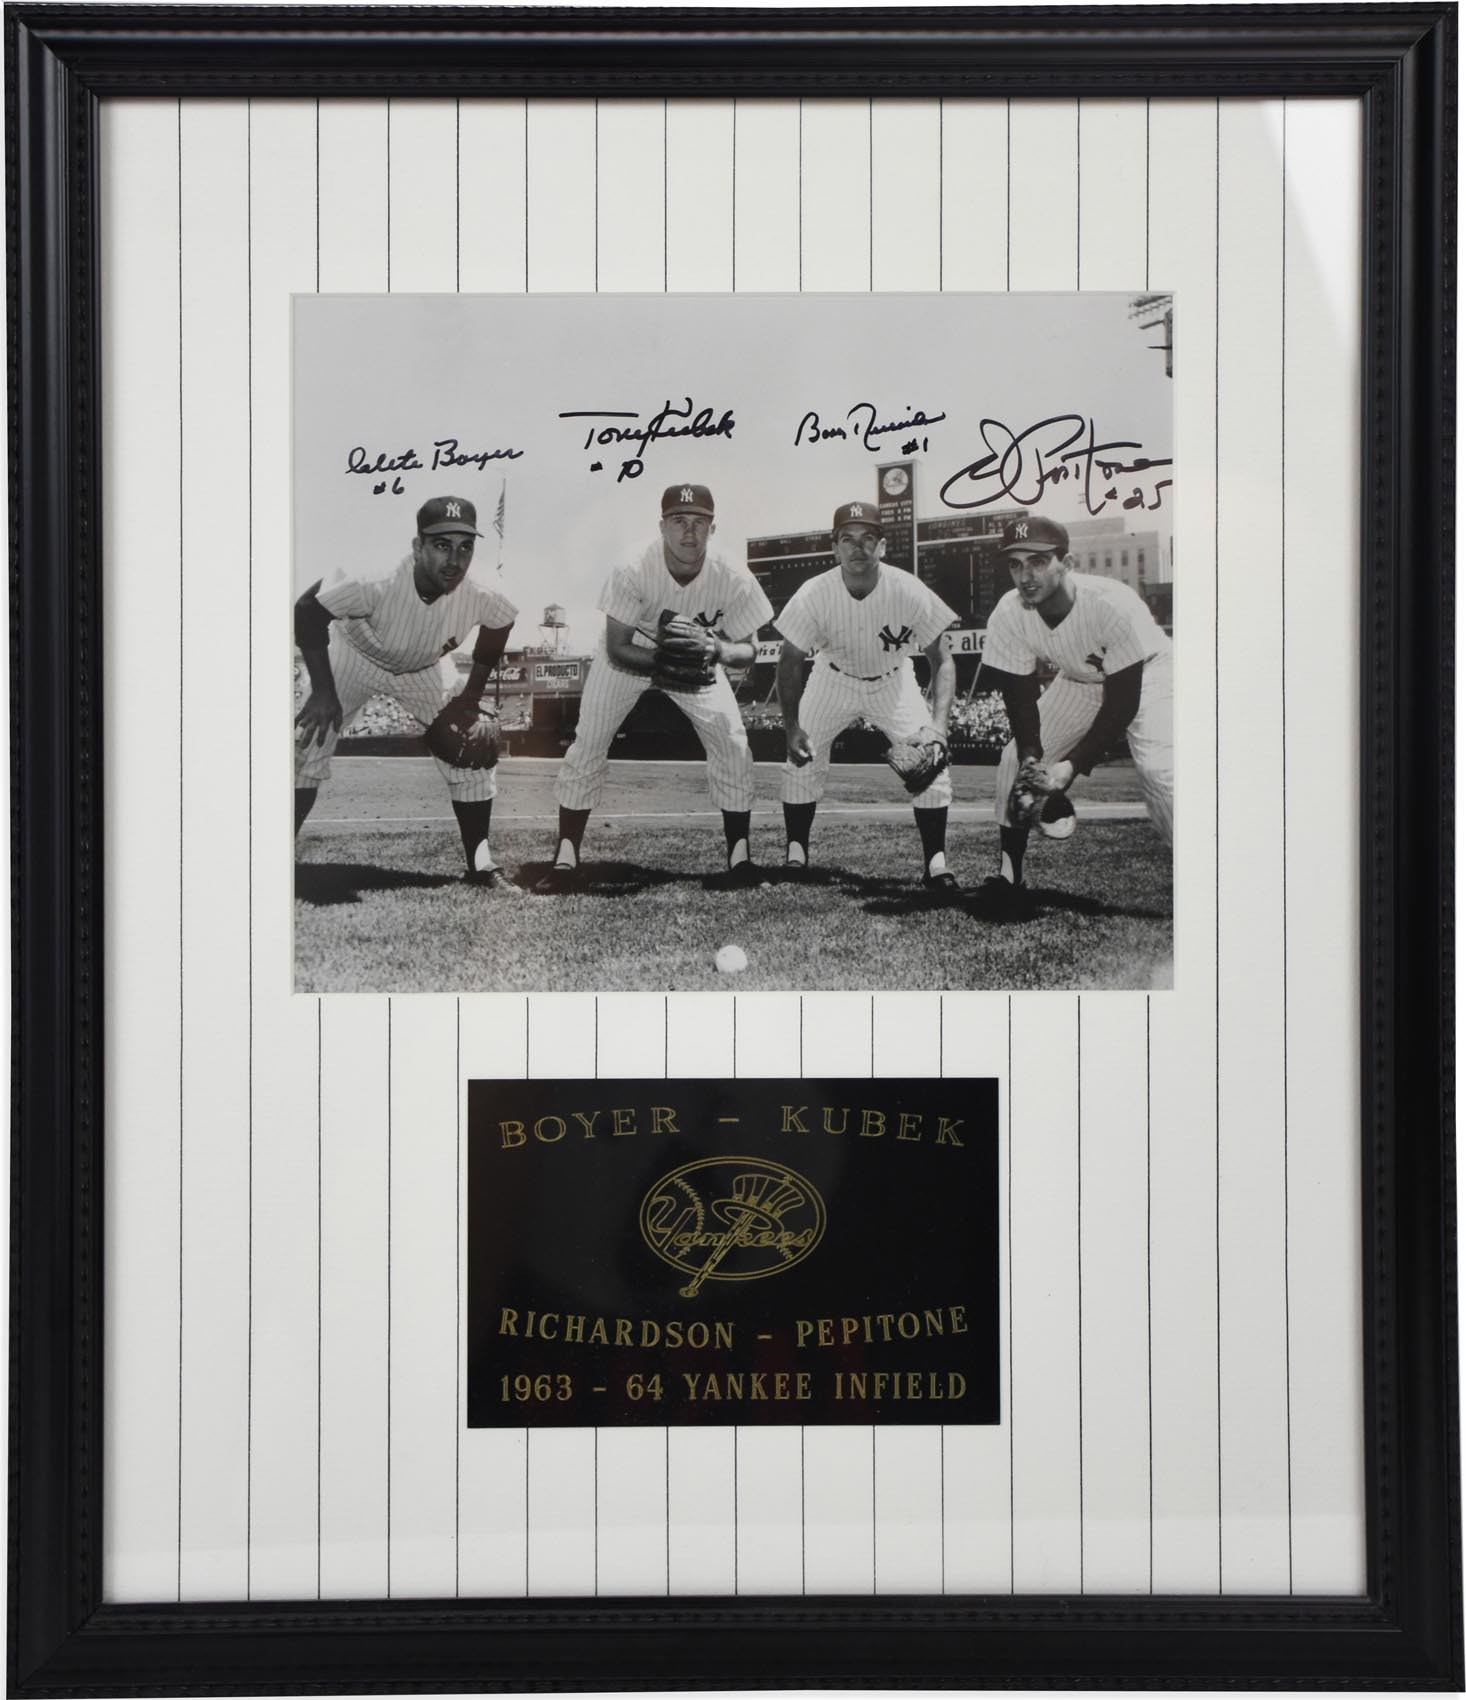 Baseball Autographs - 1960s New York Infield Pair of Signed Displays